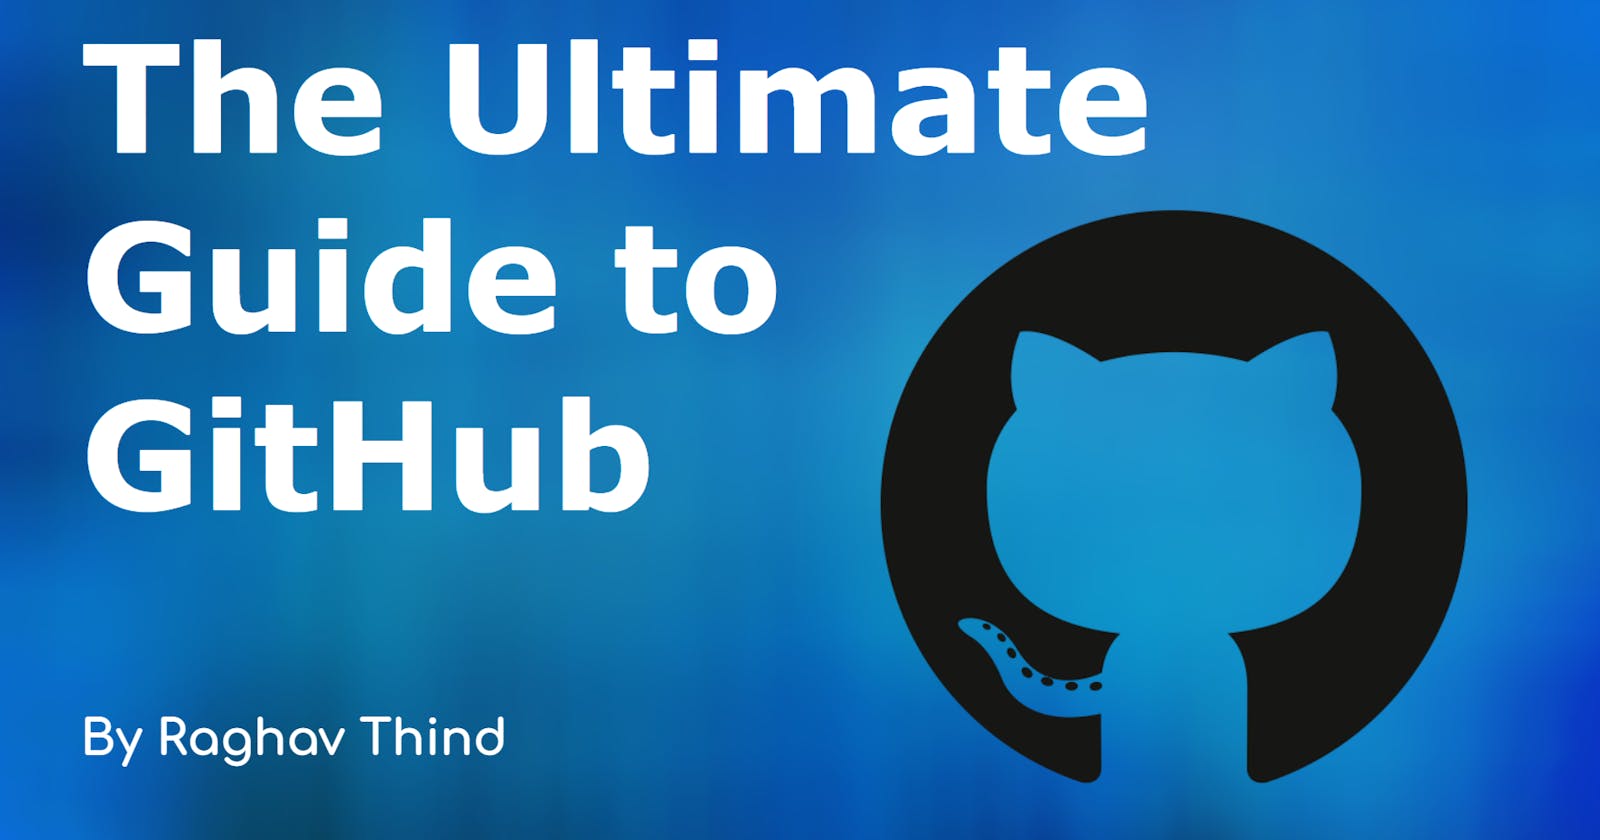 The Ultimate Guide to GitHub